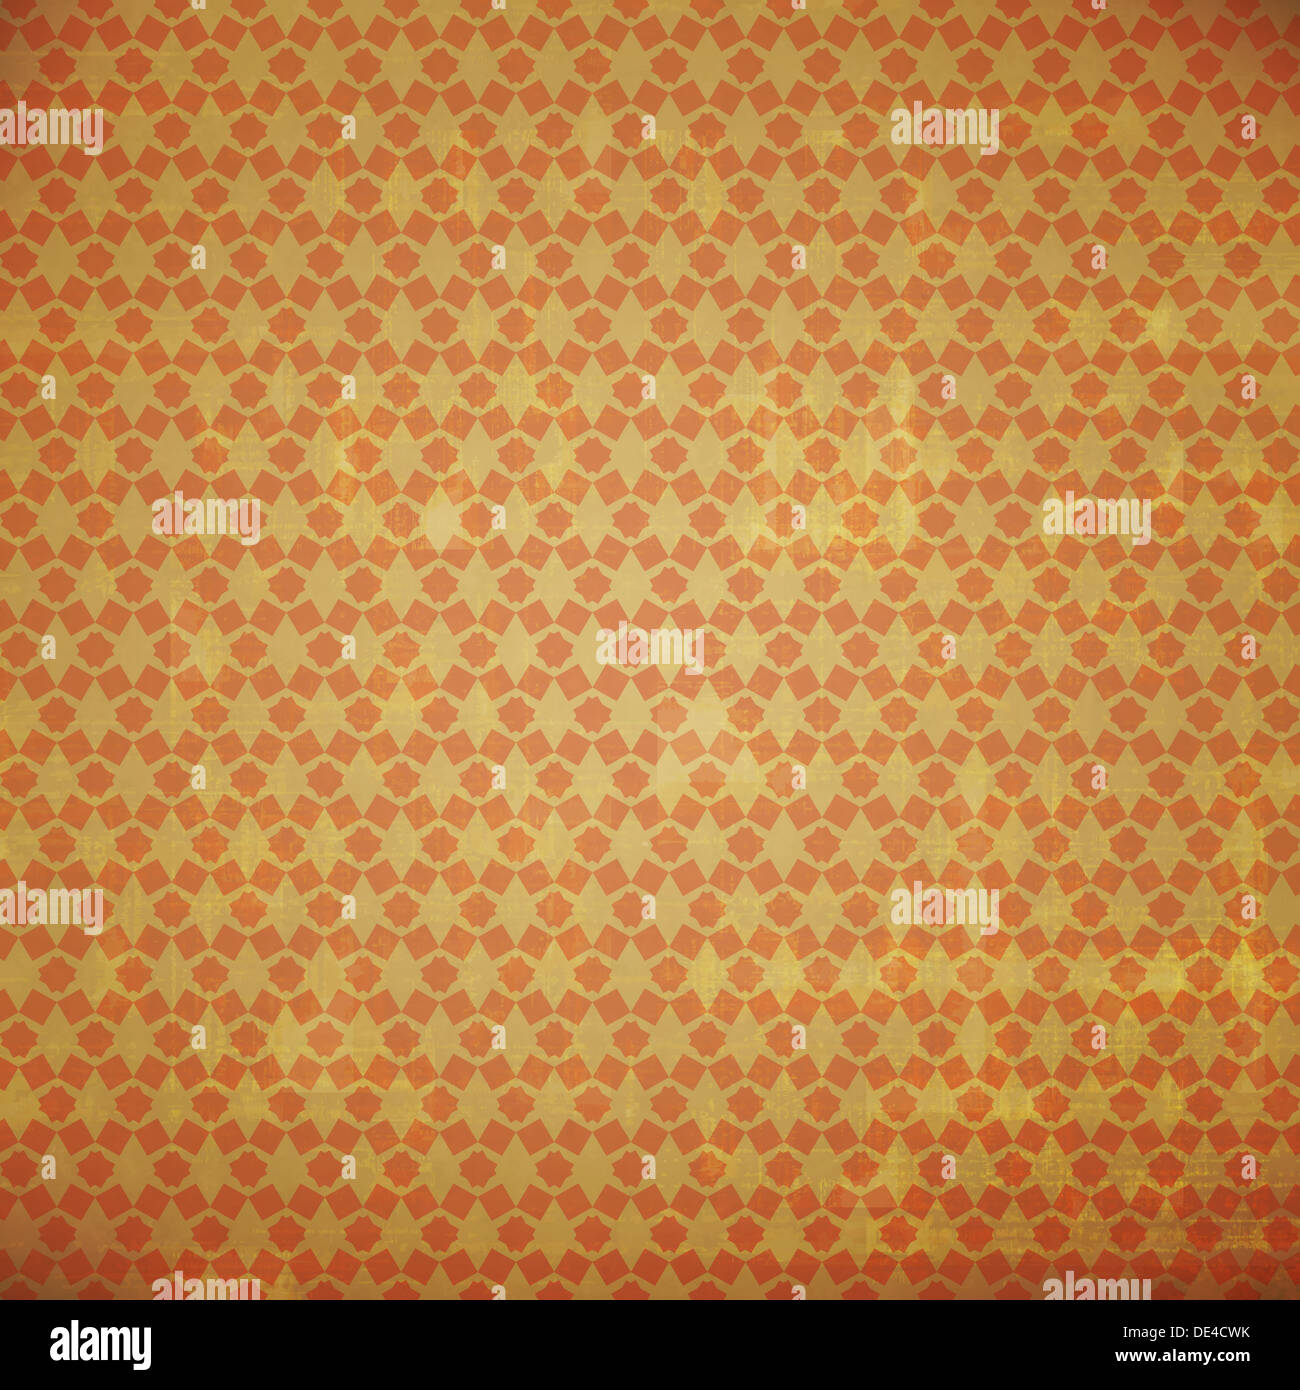 new seamless pattern with vintage style ornament can use like grunge background Stock Photo